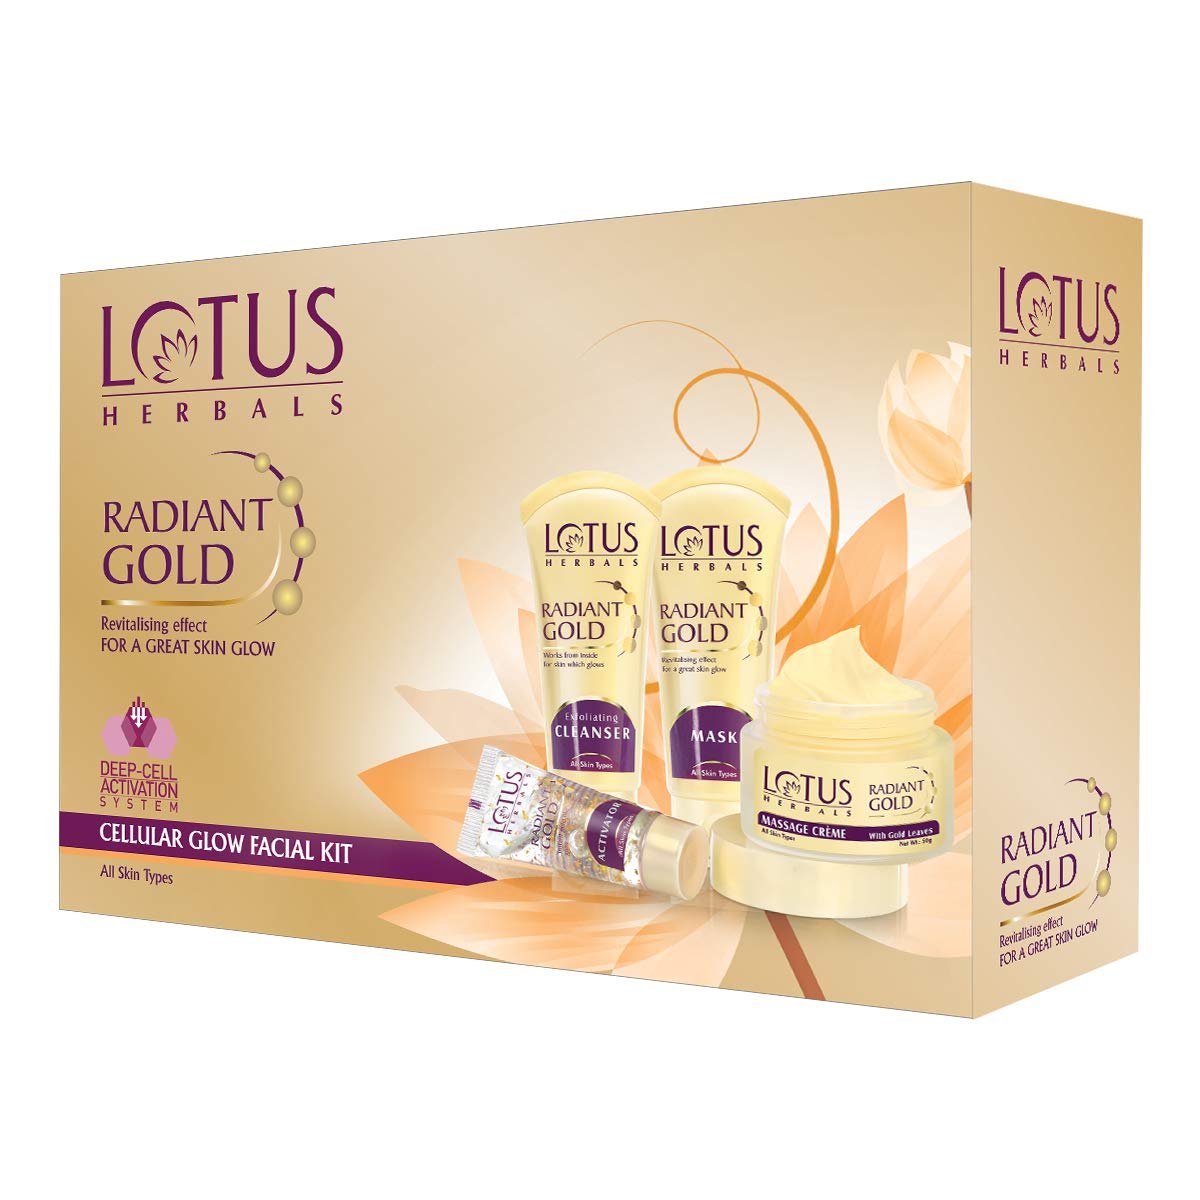 Lotus Radiant Gold Facial Kit for instant glow with 24K Pure Gold & Papaya,4 easy steps , 170g (Multiple use) - image 1 of 6